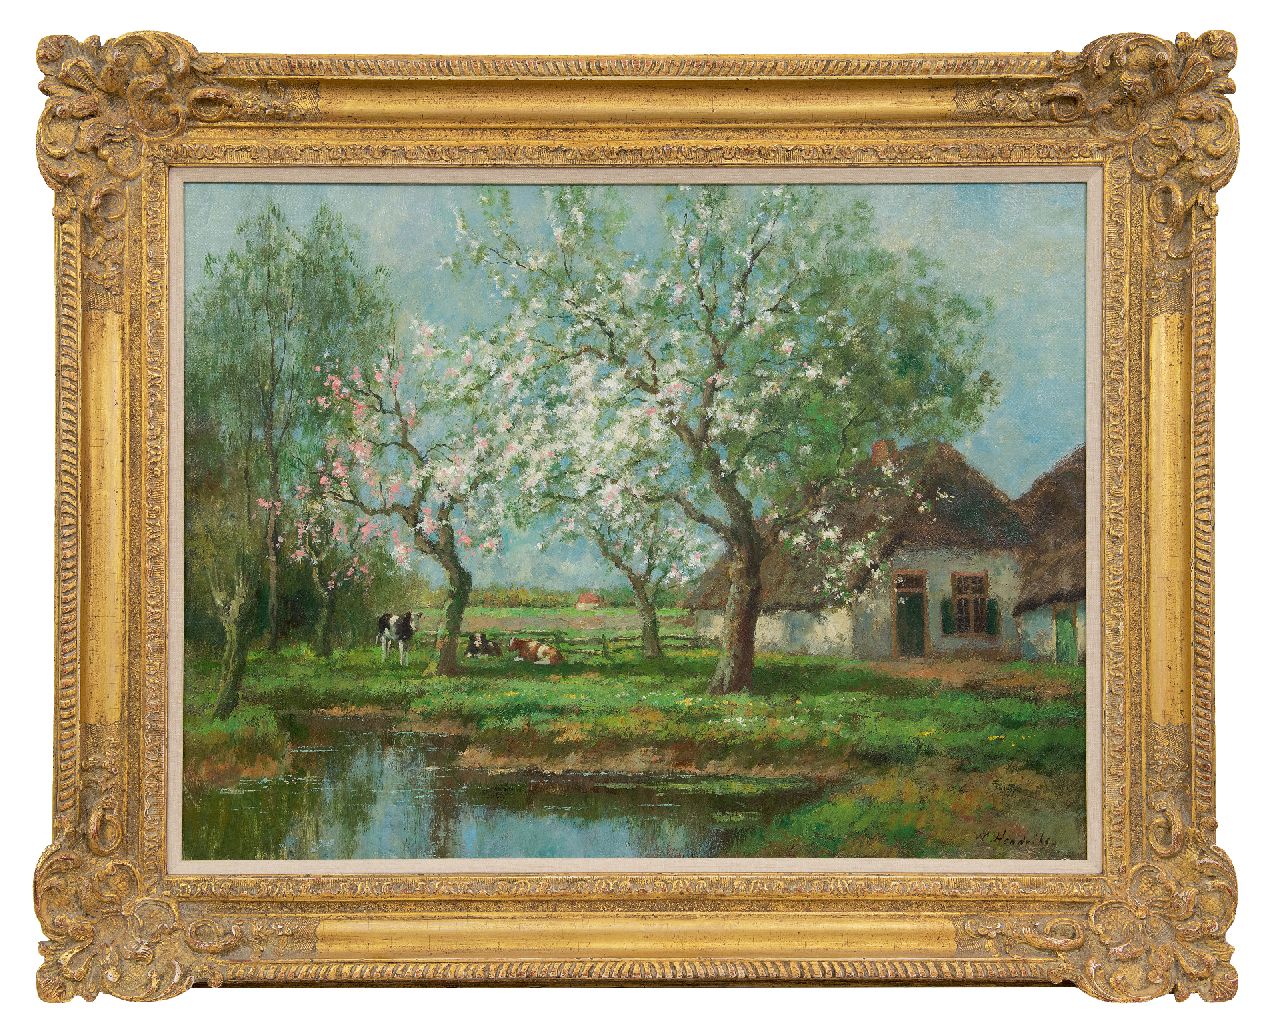 Bouter C.W.  | Cornelis Wouter 'Cor' Bouter, Farmyard in spring, oil on canvas 61.0 x 81.6 cm, signed l.r. 'W. Hendriks' (pseudonym)